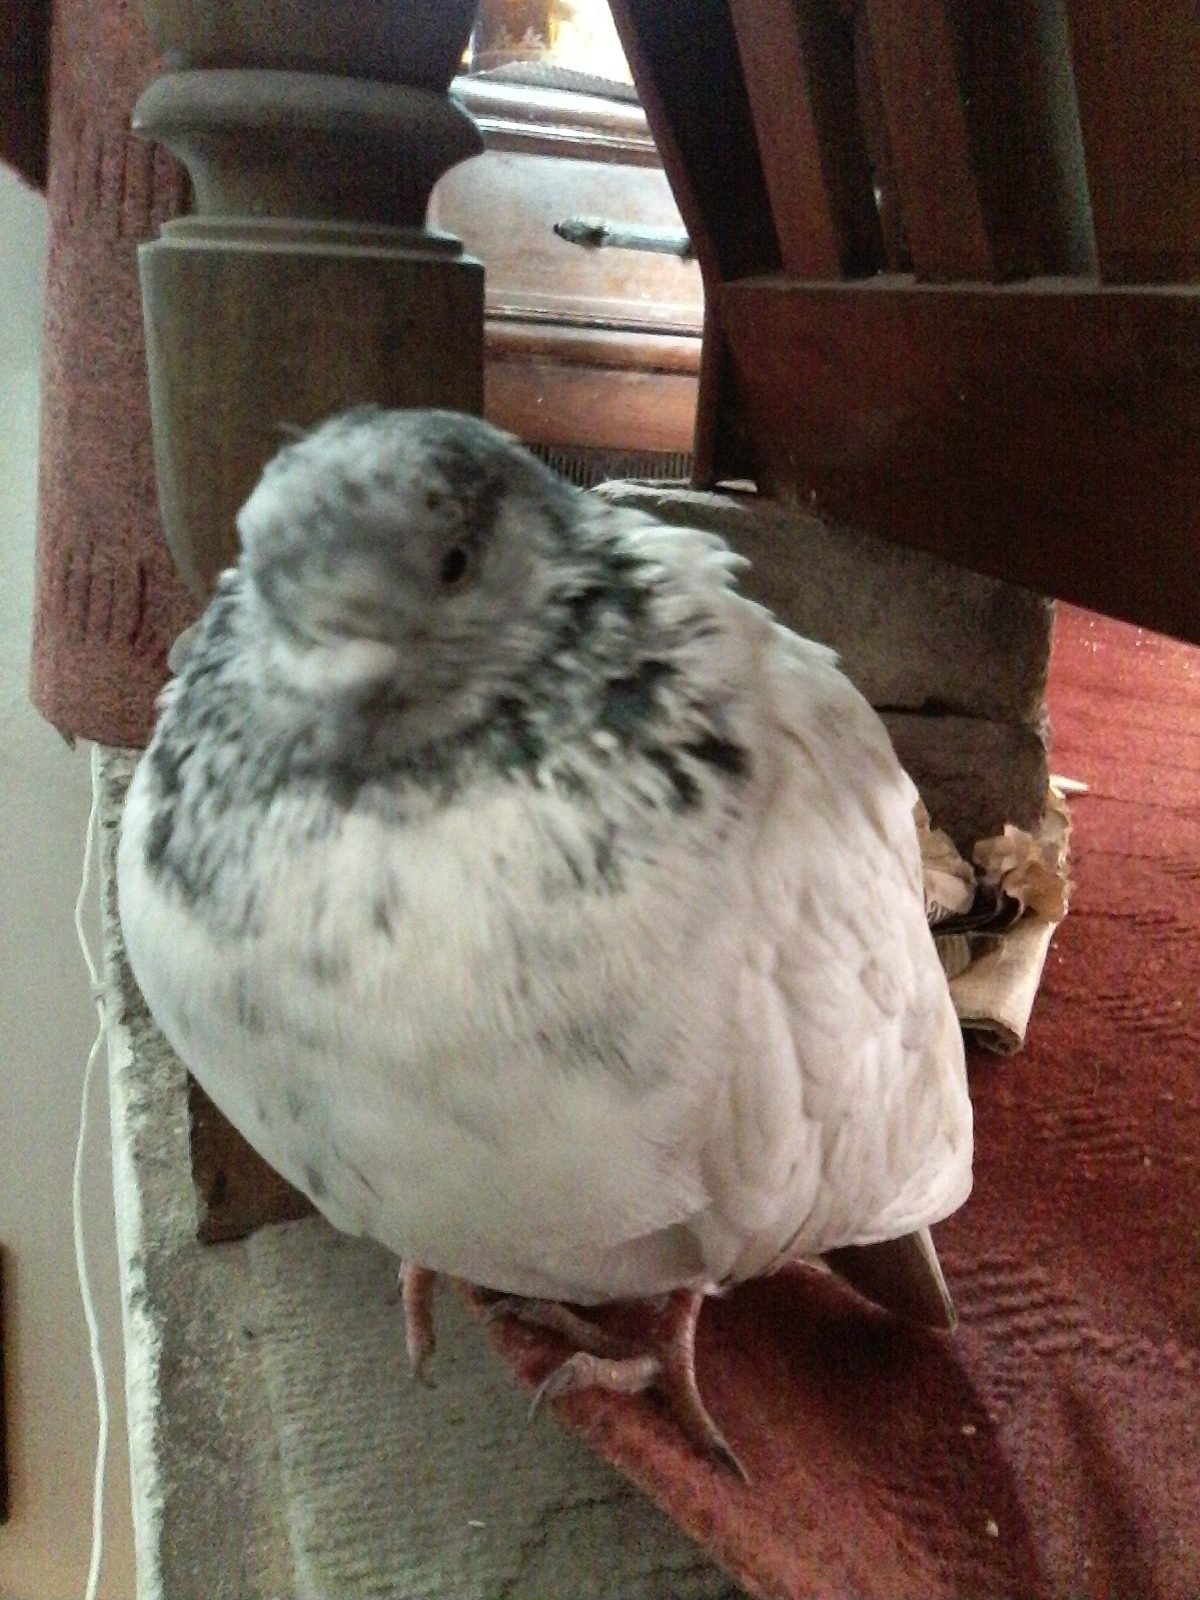 ] my pigeon has been puffed up and he open his beak towards up but he has been earing very much and he is active and sometimes not active